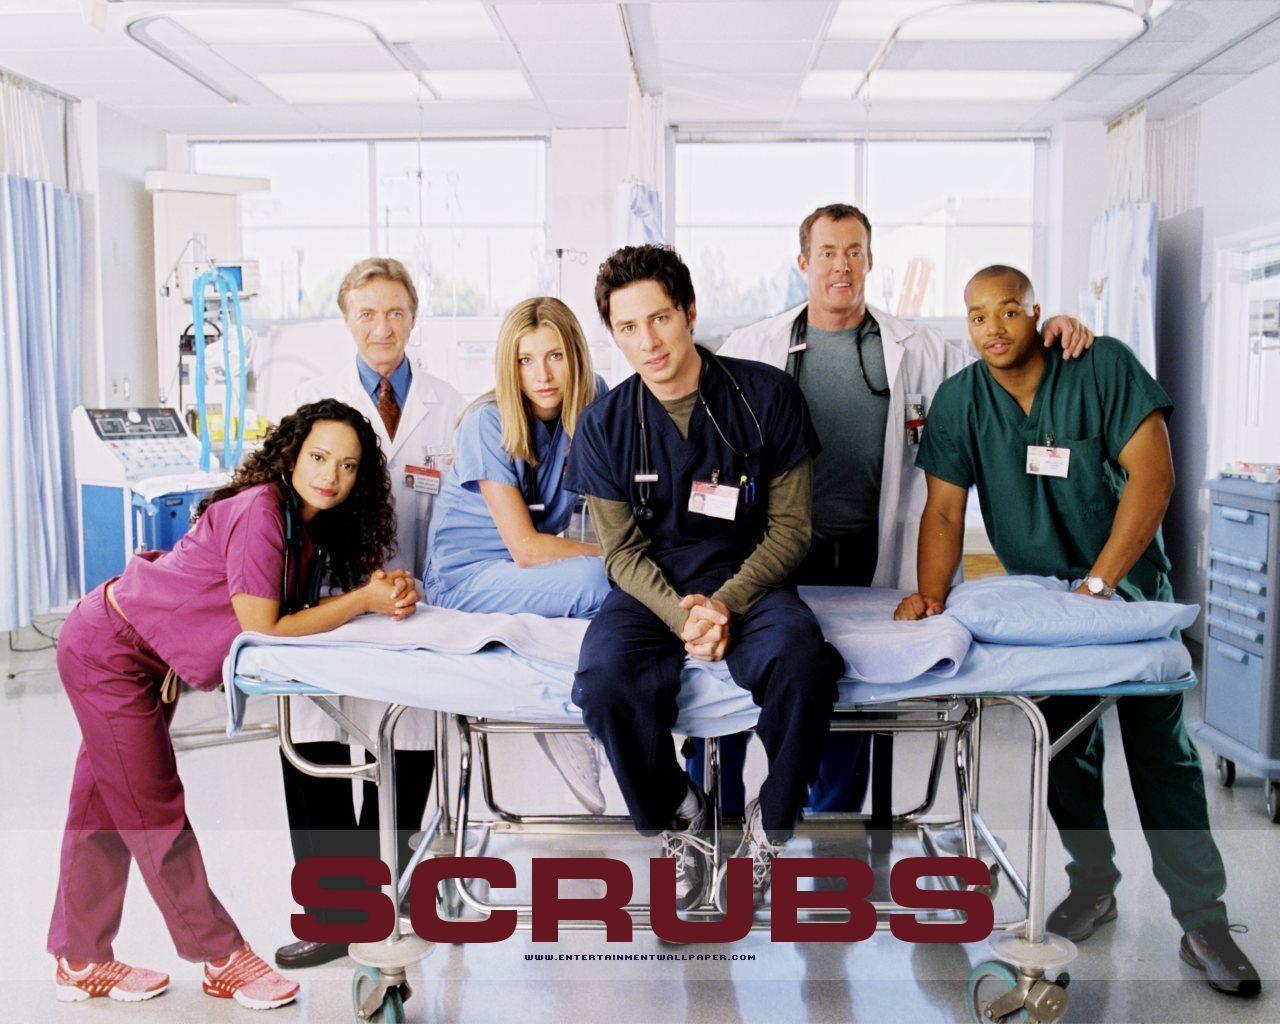 Incredible HDQ Cover Wallpaper's Collection: Scrubs Wallpaper 33